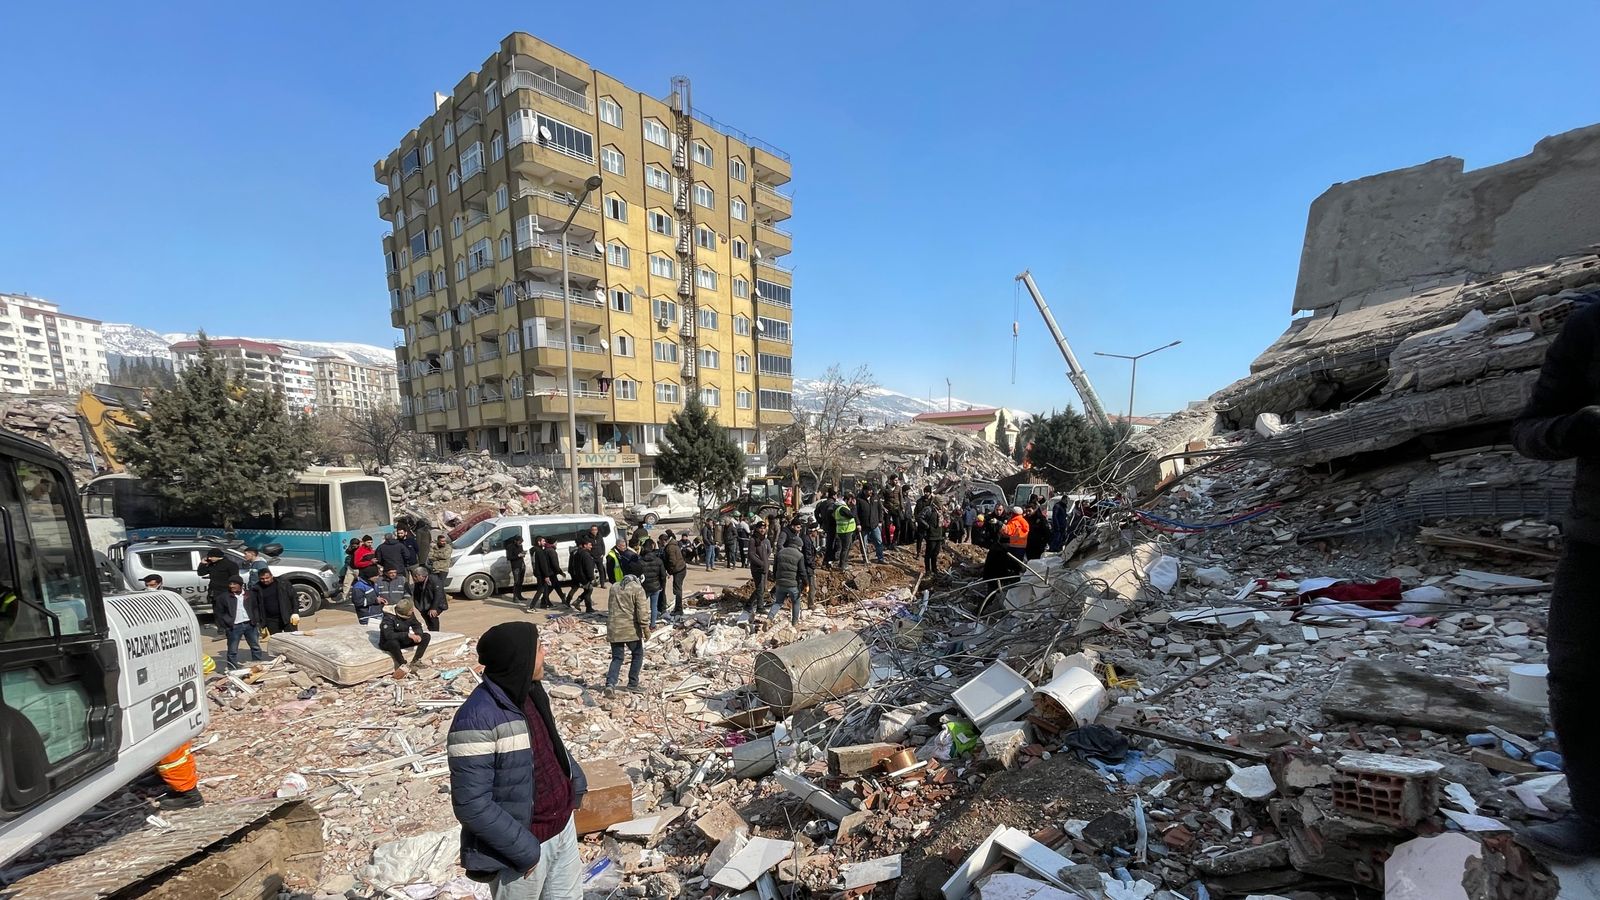 The number of victims of the earthquake in Turkey and Syria is expected